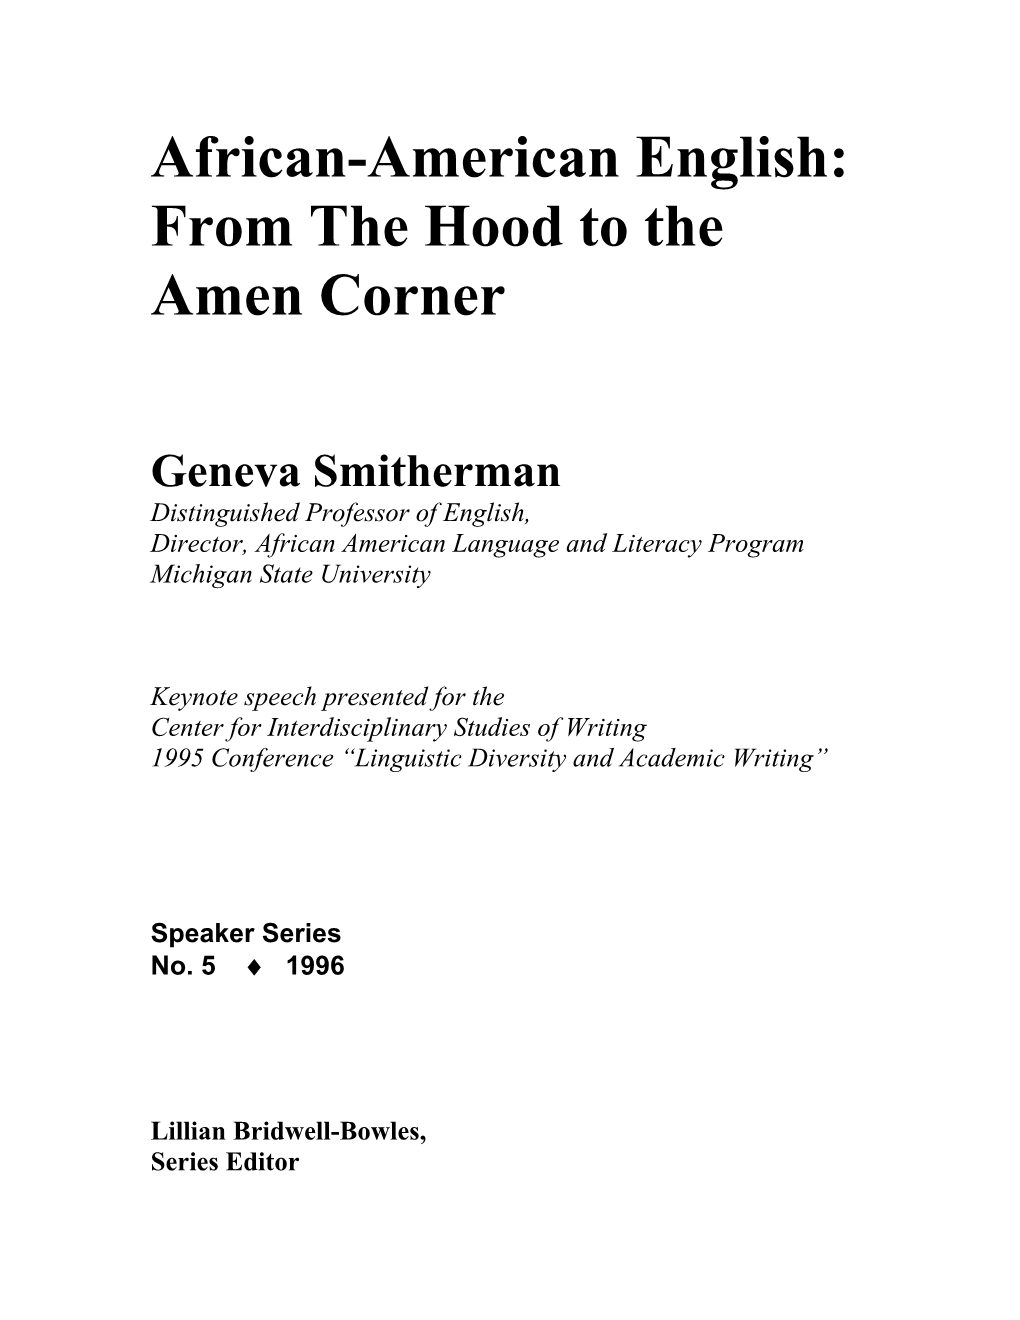 African-American English: from the Hood to the Amen Corner